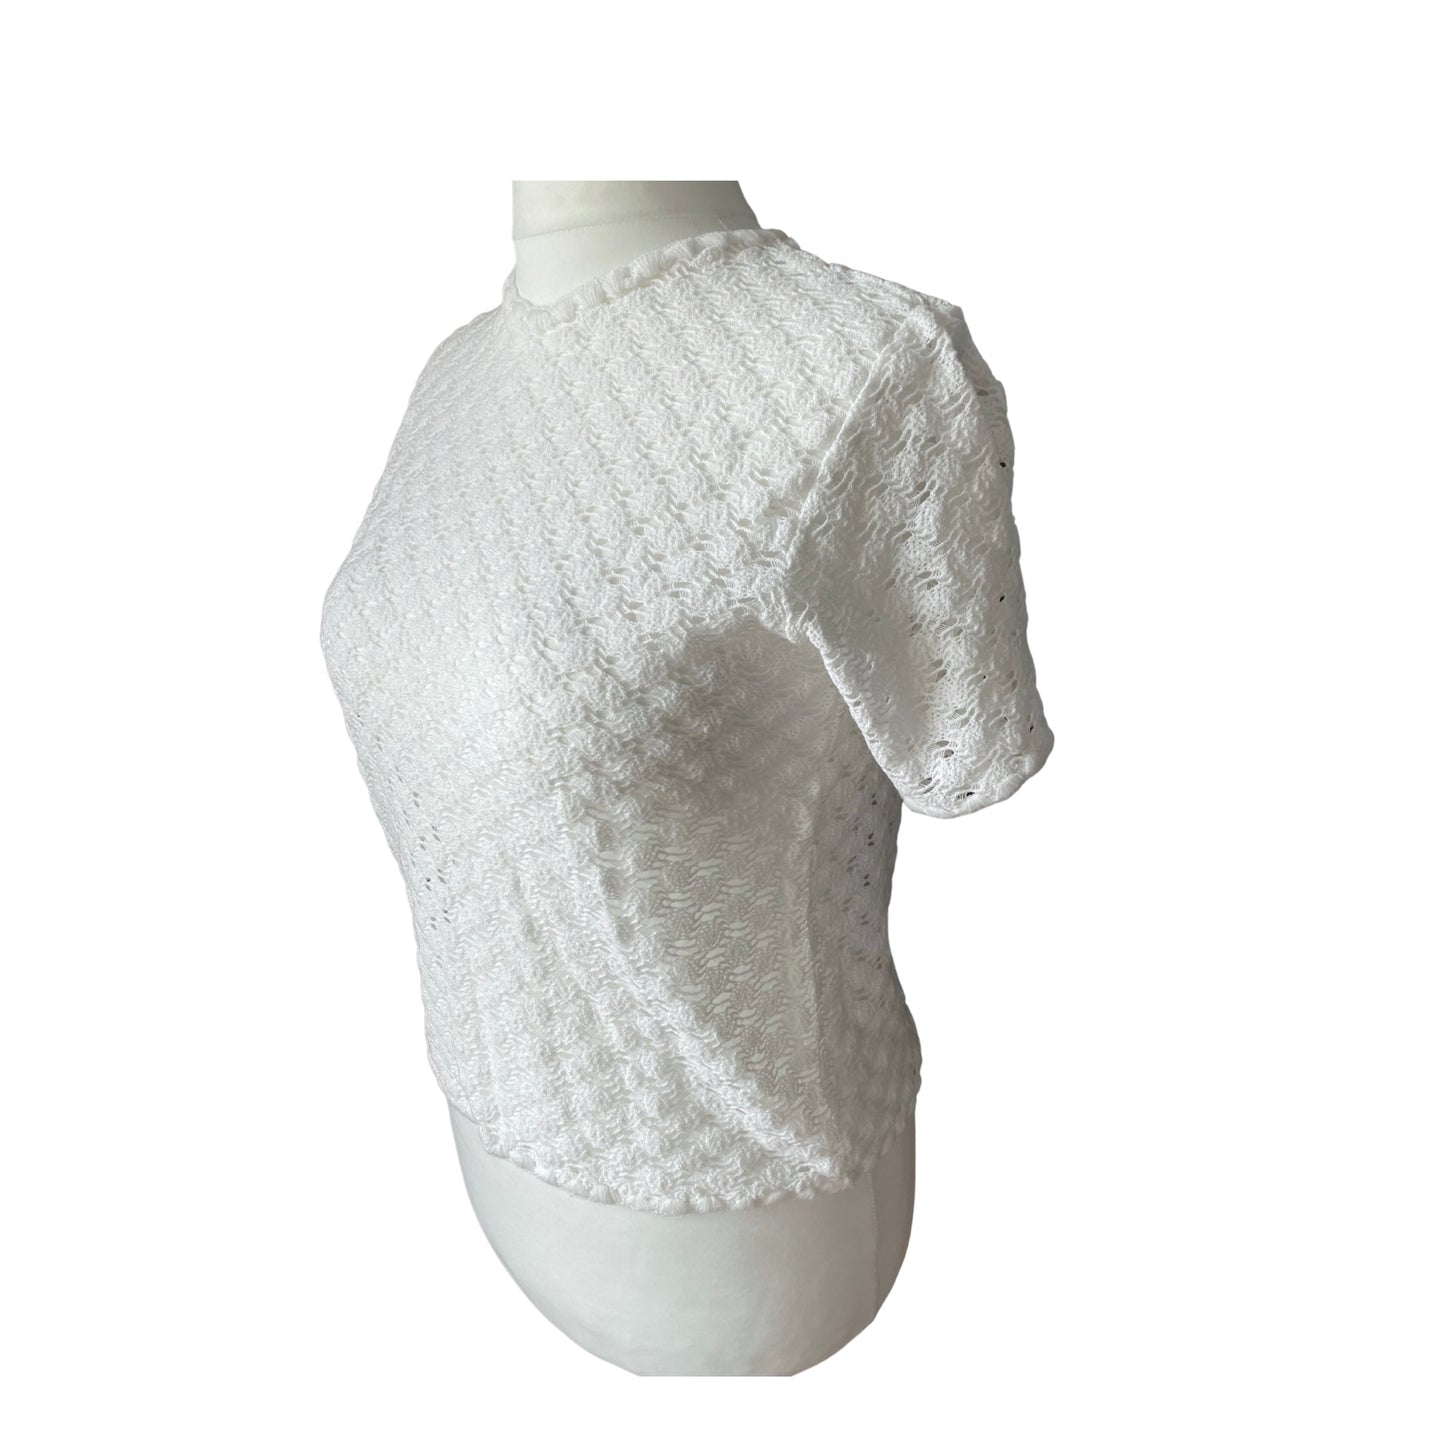 White open knit 60s short sleeved top/ round neck tee shirt  . Approx UK size 12-16